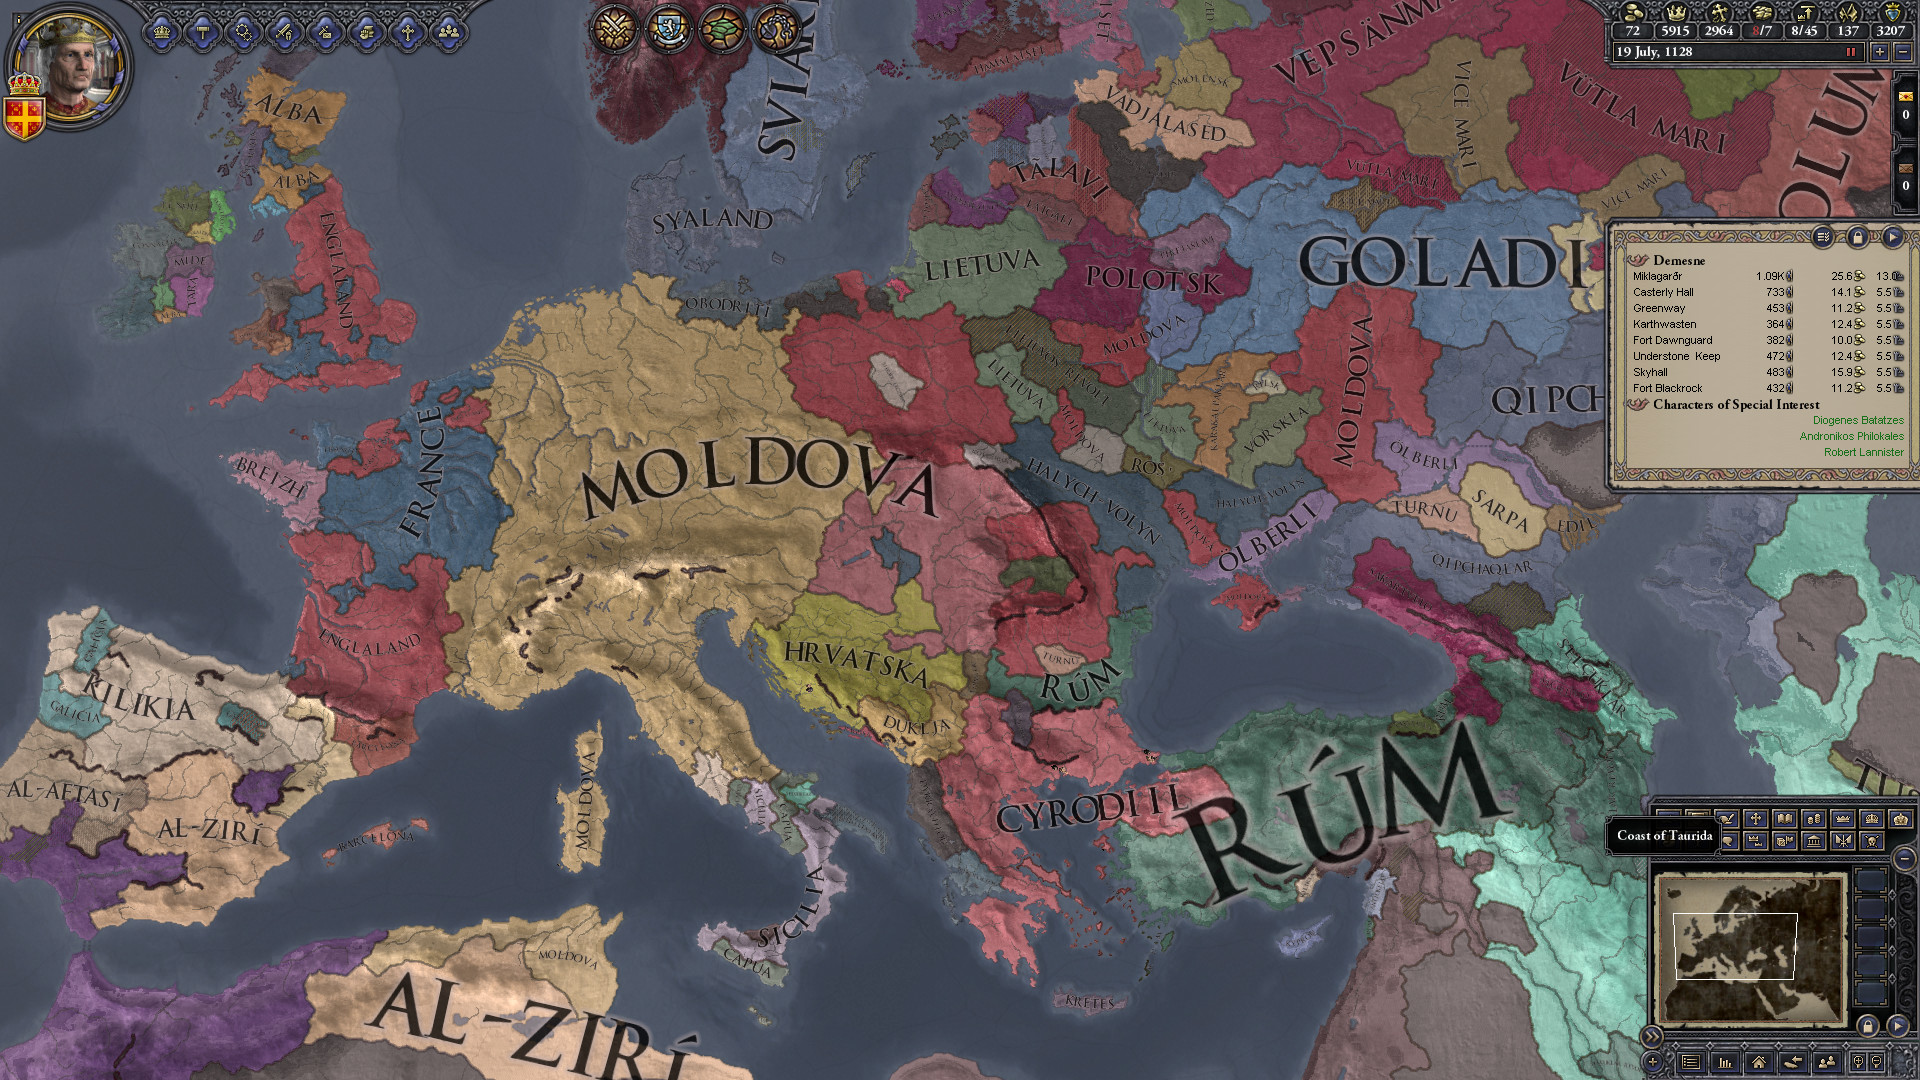 1920x1080 What holy roman empire? I only know of glorious MOLDOVA.